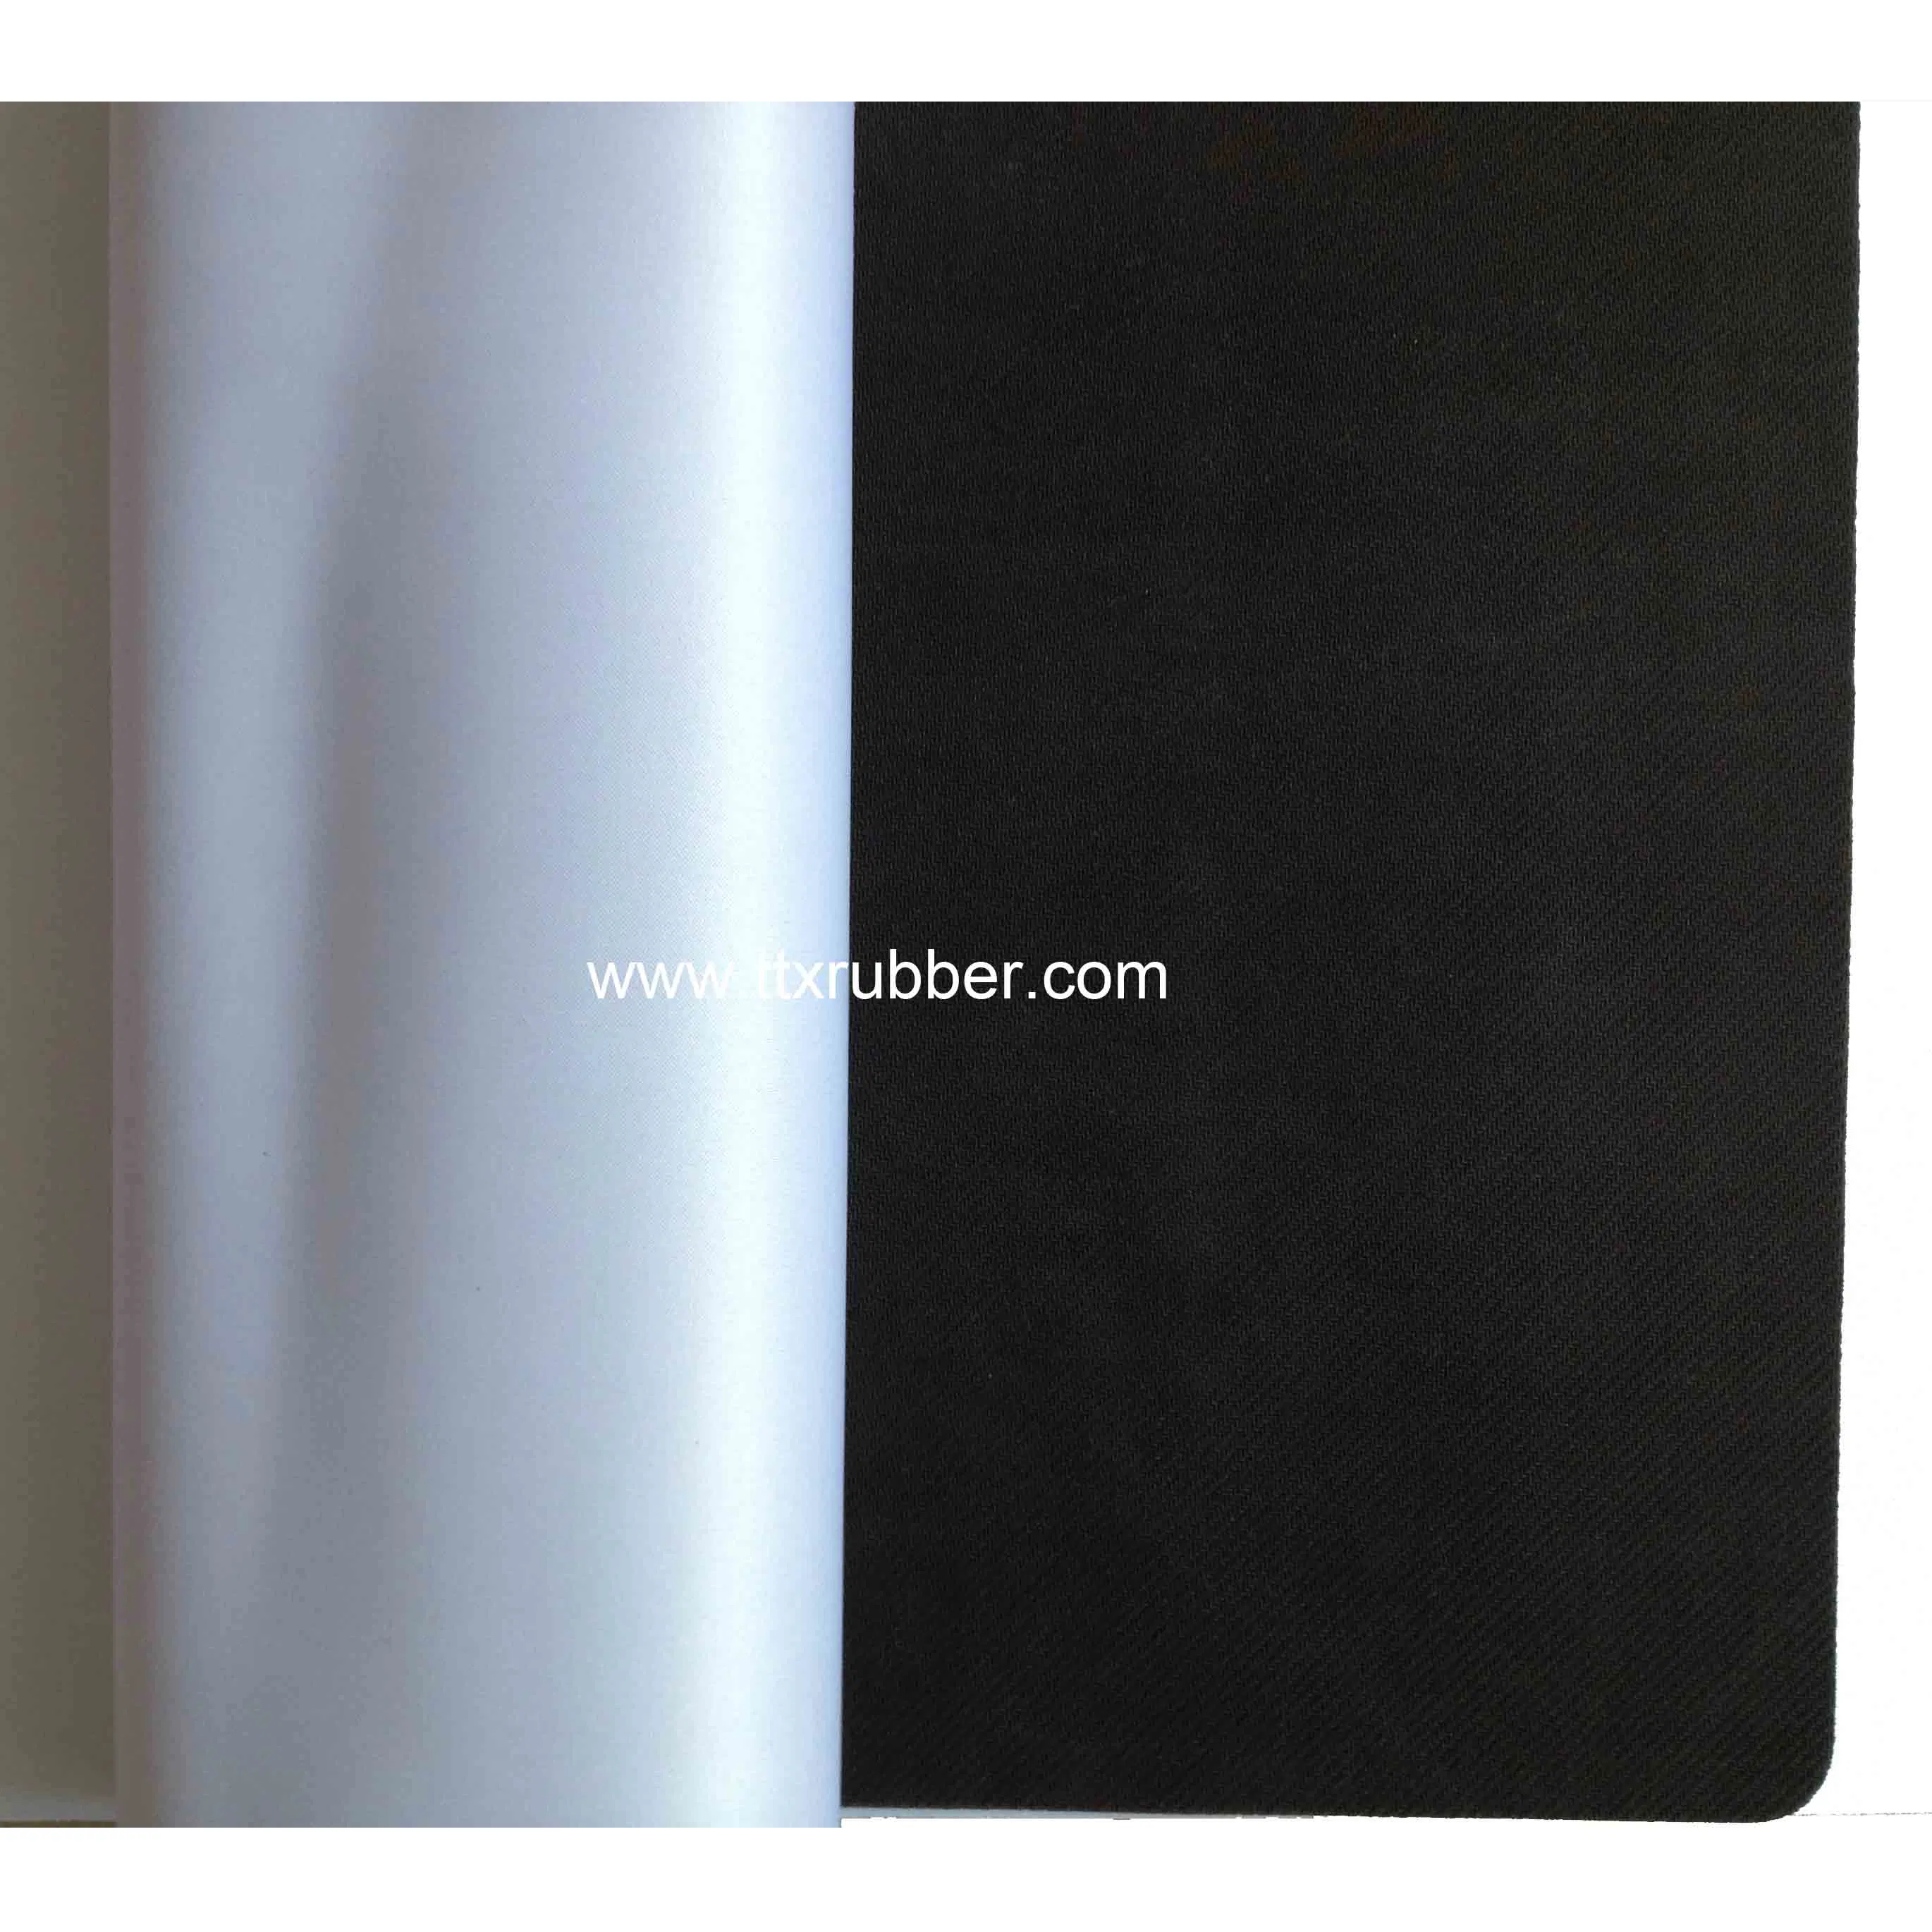 Trimmed Mouse Pad Material, Rubber Roll Material